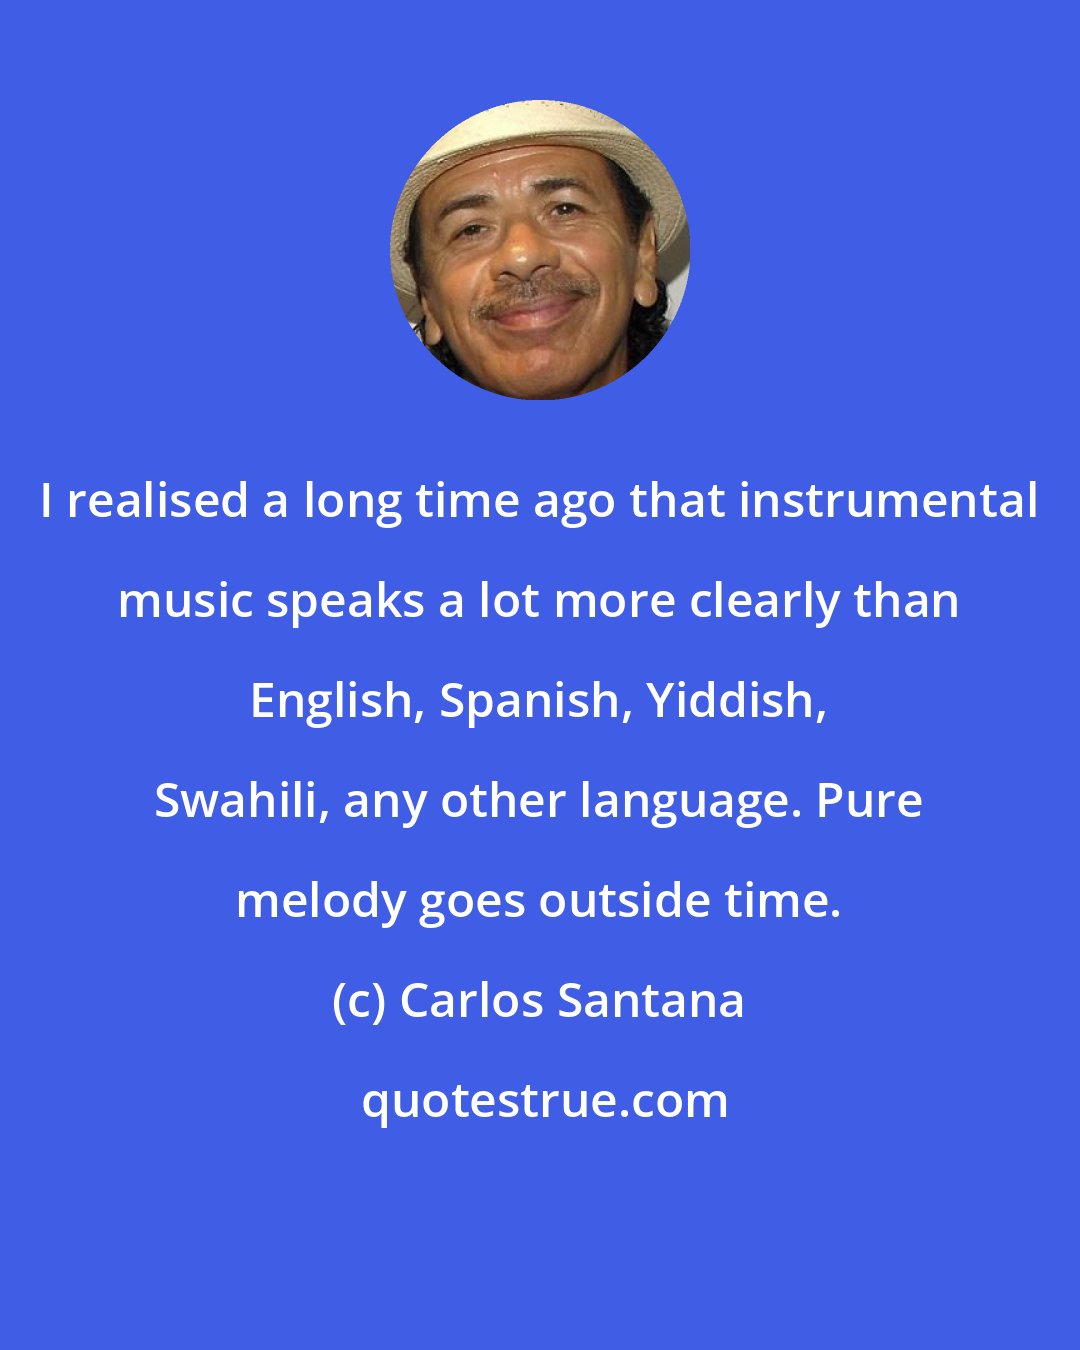 Carlos Santana: I realised a long time ago that instrumental music speaks a lot more clearly than English, Spanish, Yiddish, Swahili, any other language. Pure melody goes outside time.